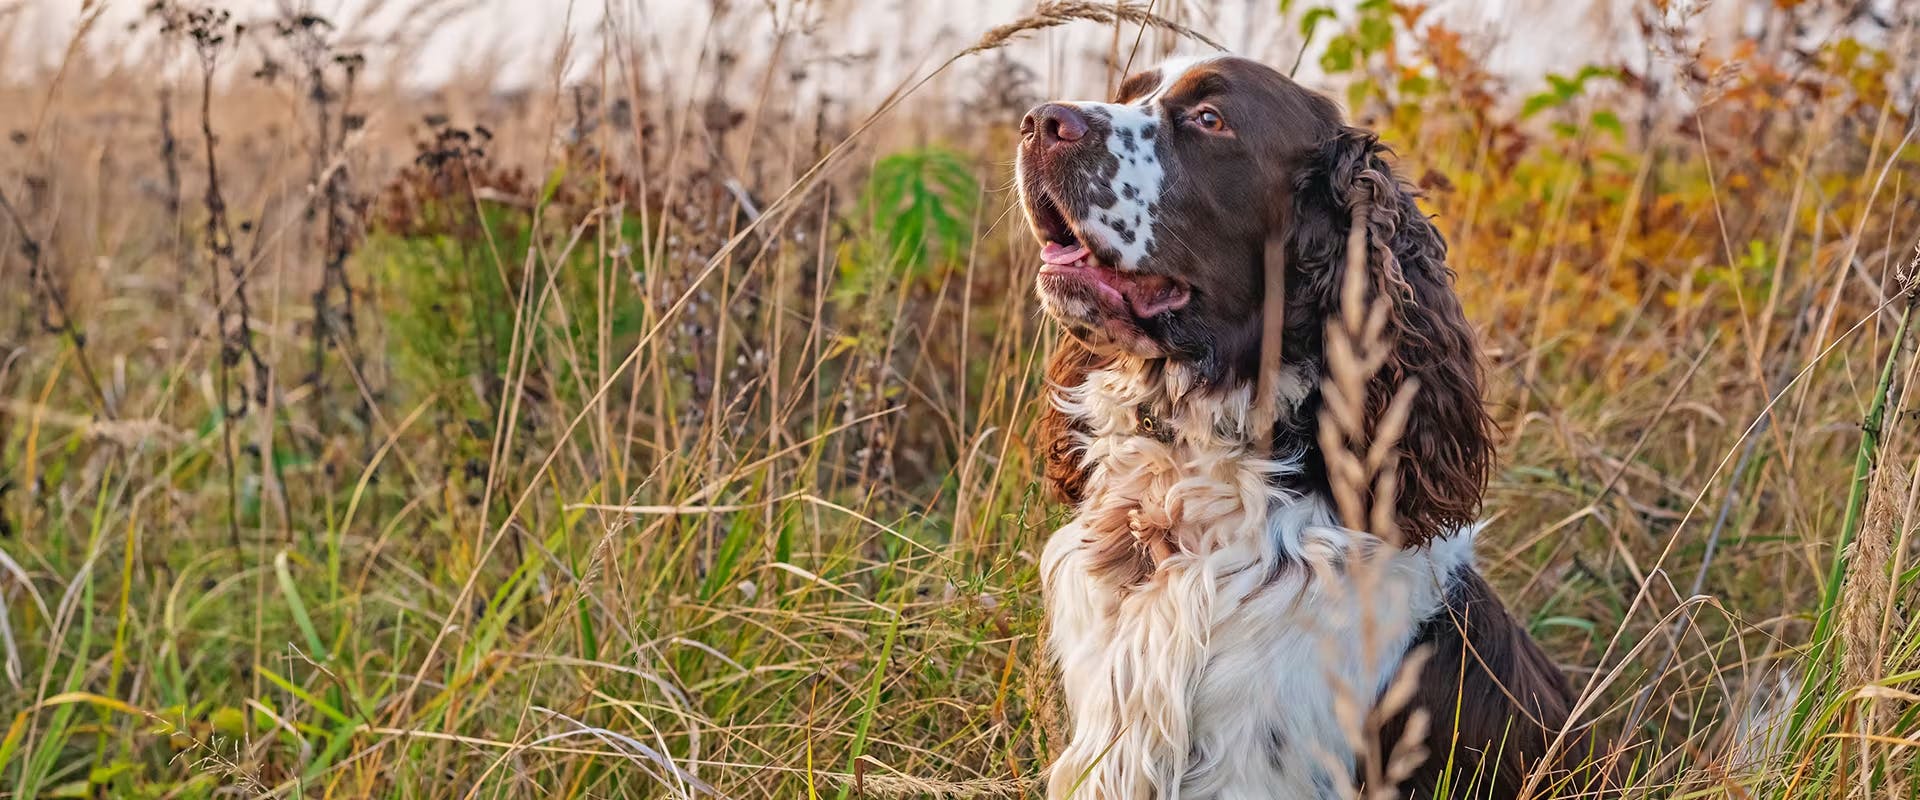 An English Springer Spaniel sitting in a field of long grass